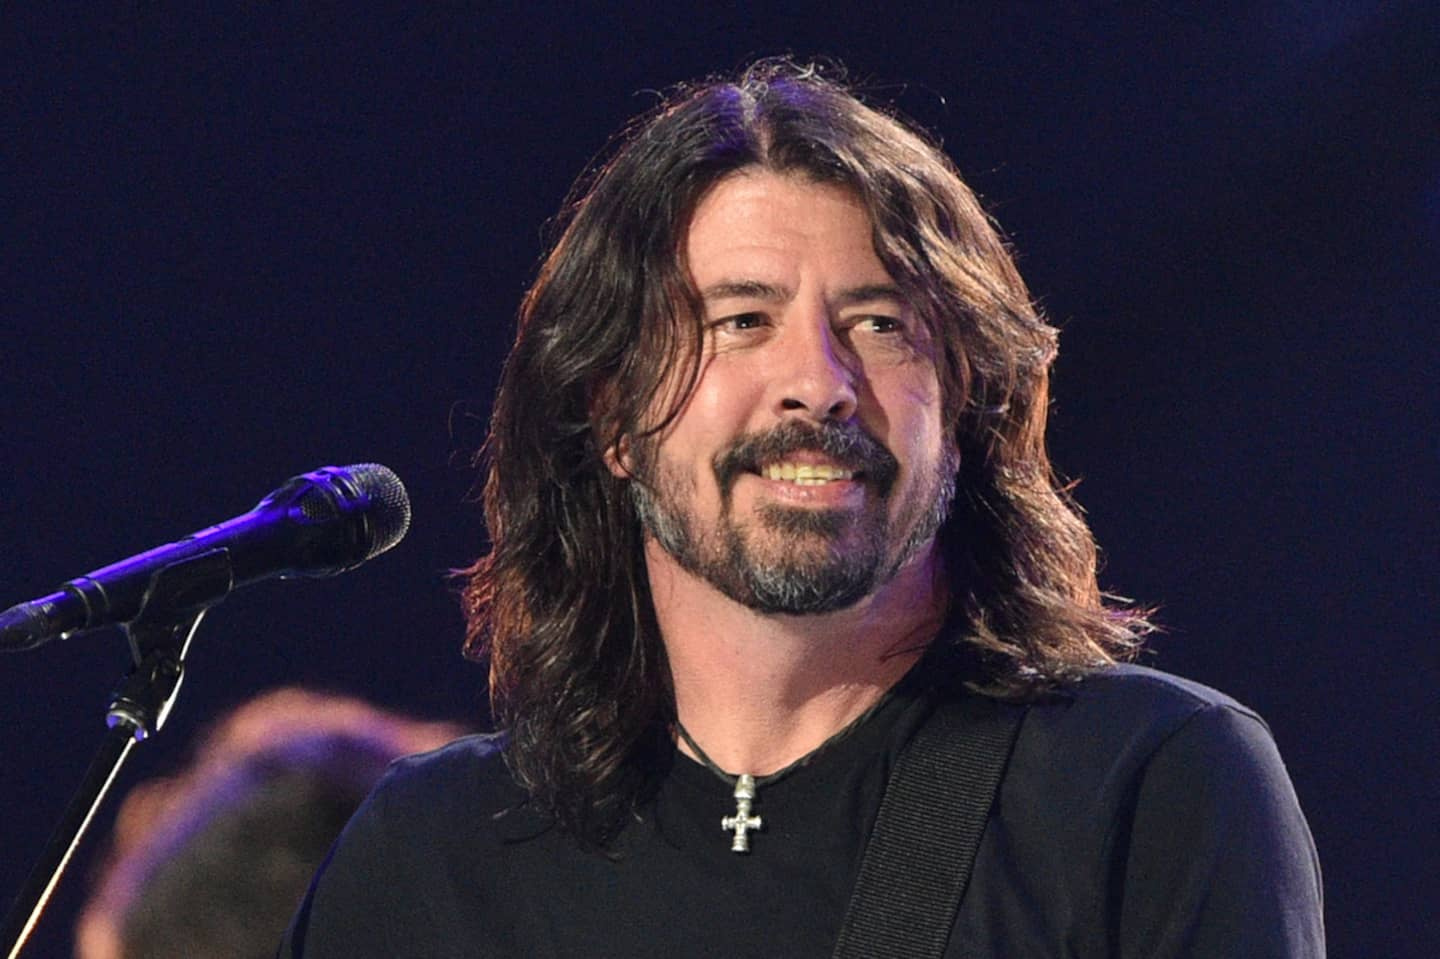 From Nirvana to Foo Fighters: The Incredible Story of Dave Grohl